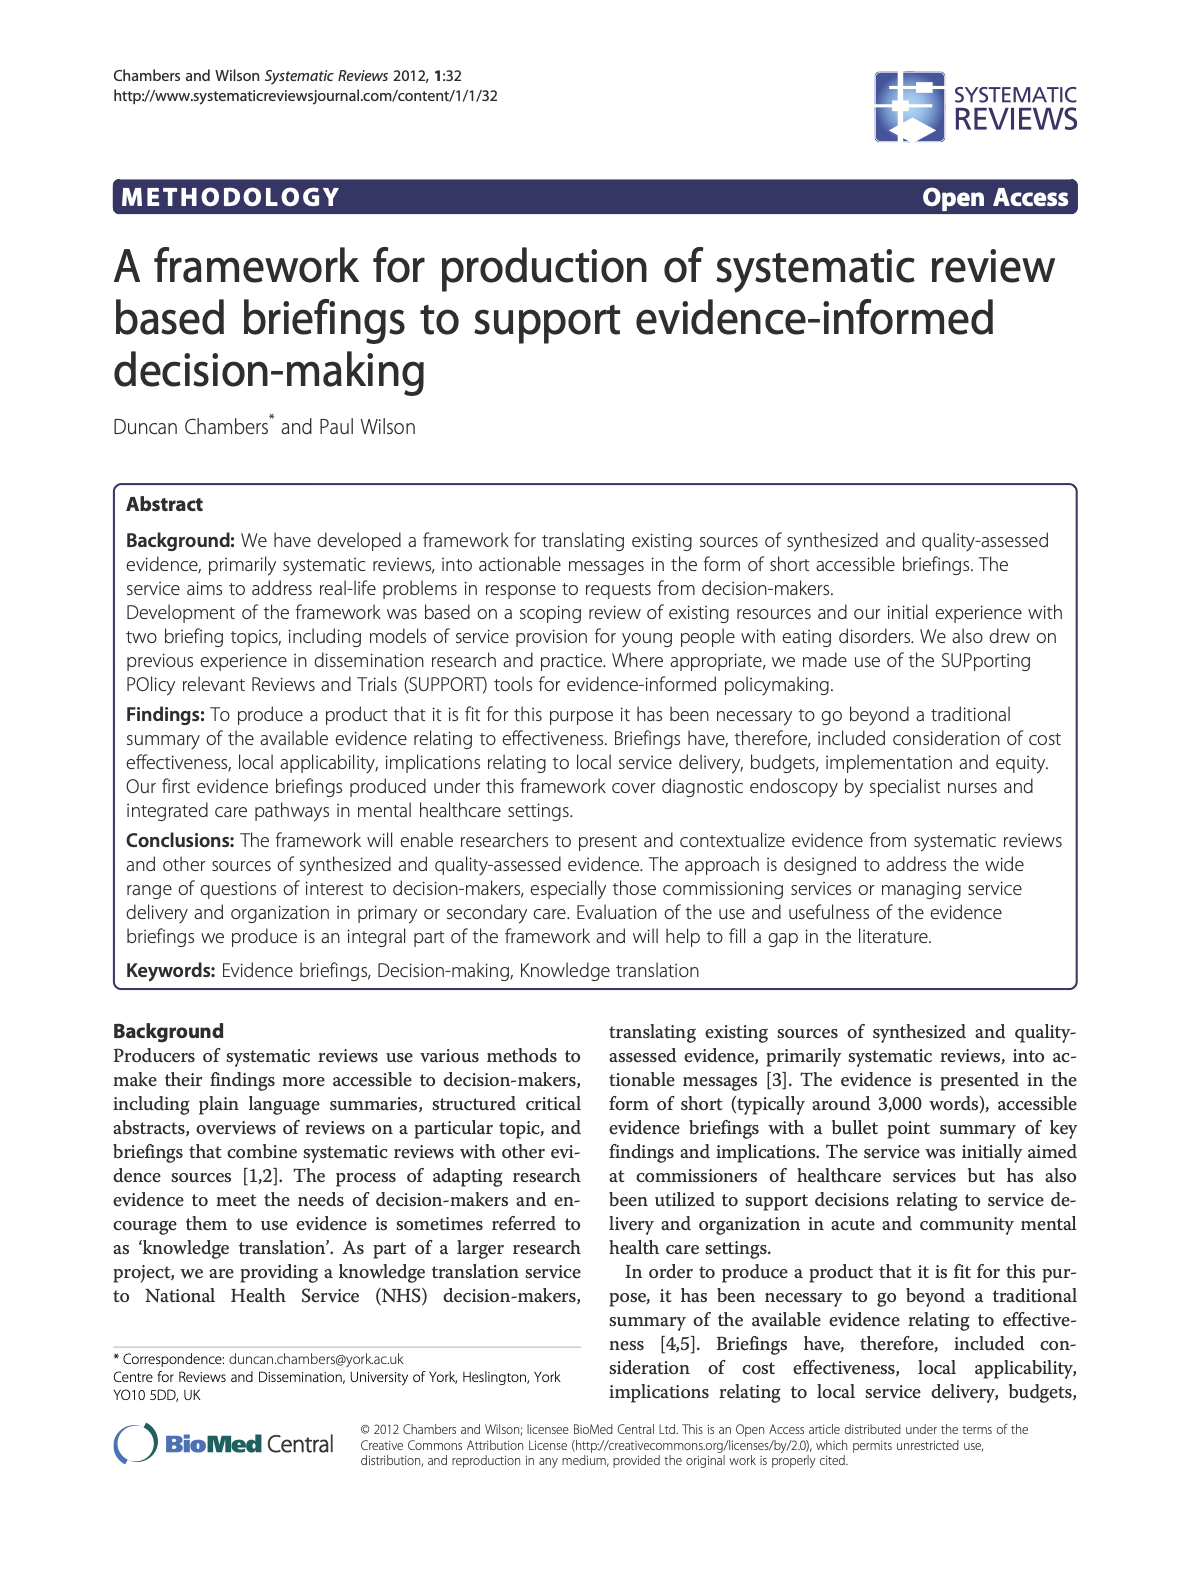 A Framework for Production of Systematic Review Based Briefings to Support Evidence-Informed Decision-Making